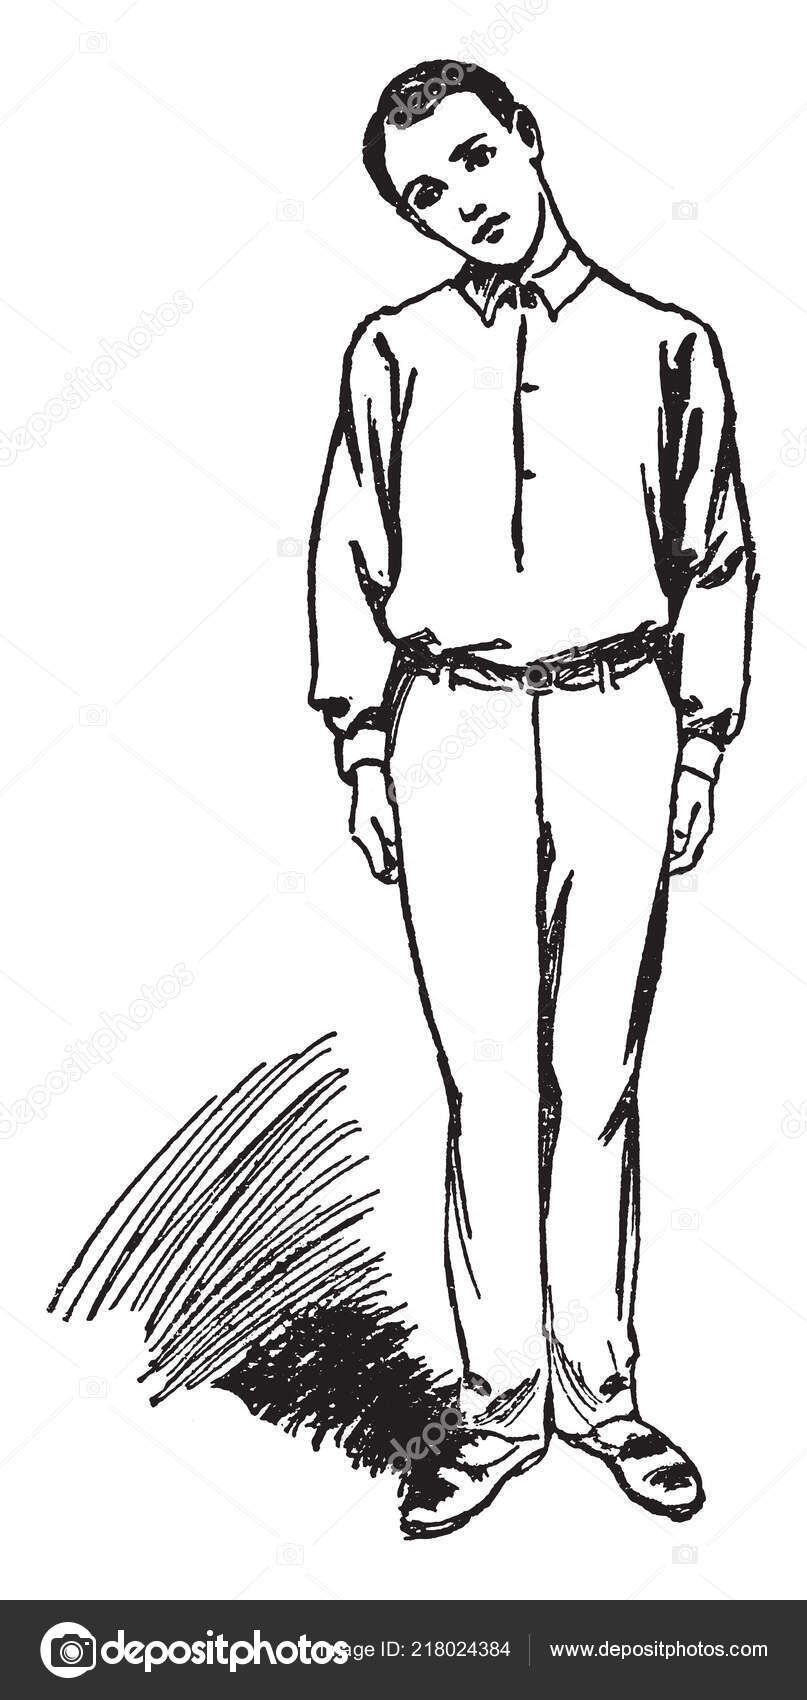 how to draw a person standing sideways